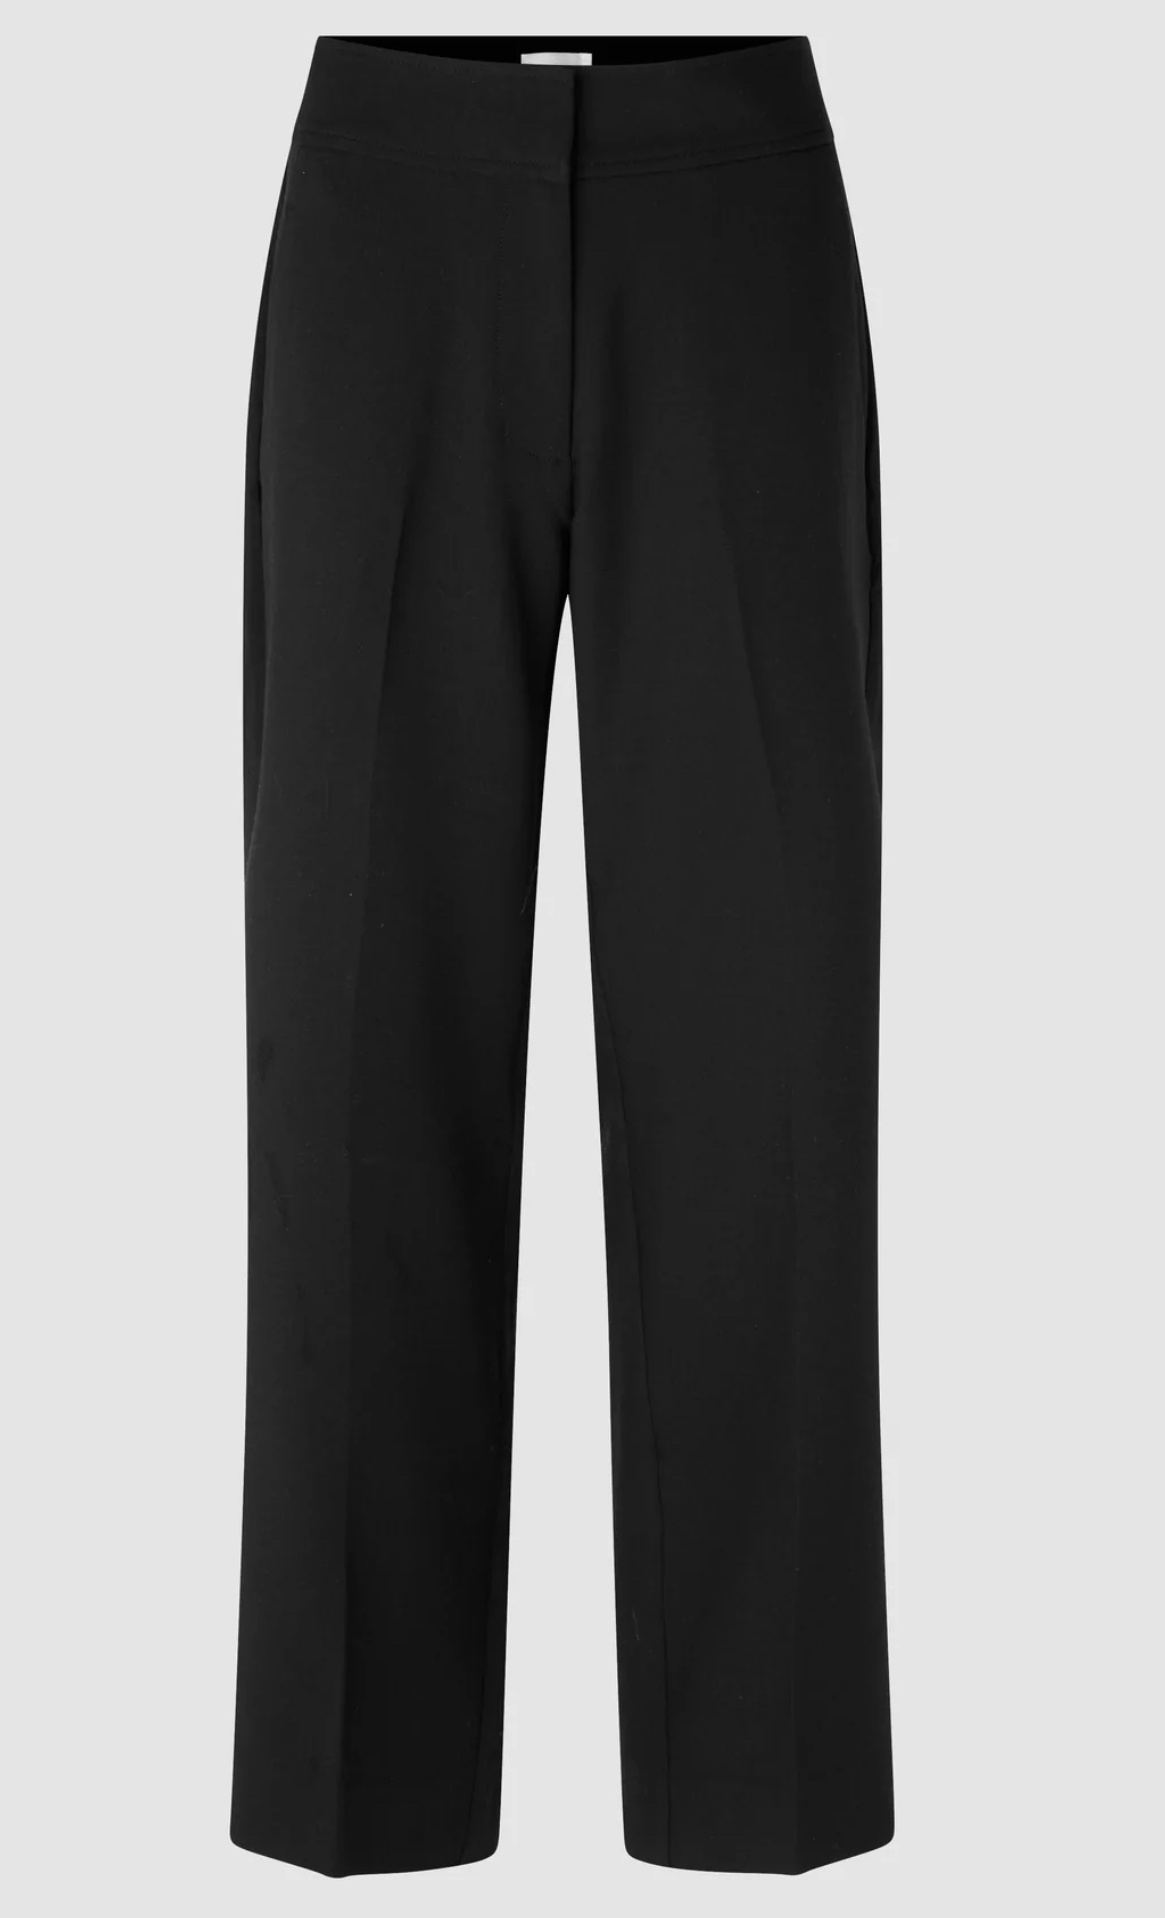 Evie classic trousers black-4